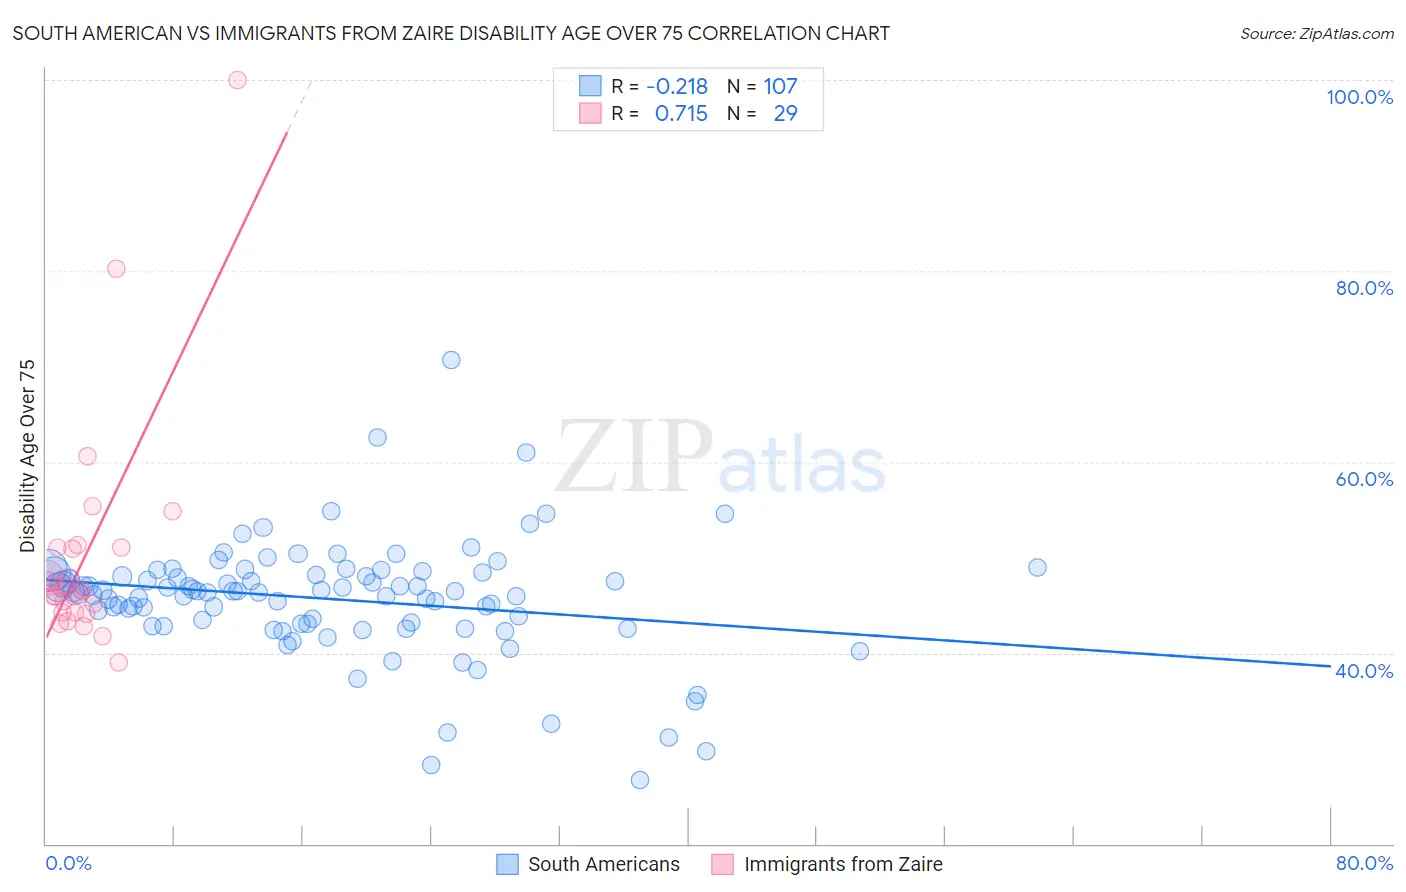 South American vs Immigrants from Zaire Disability Age Over 75